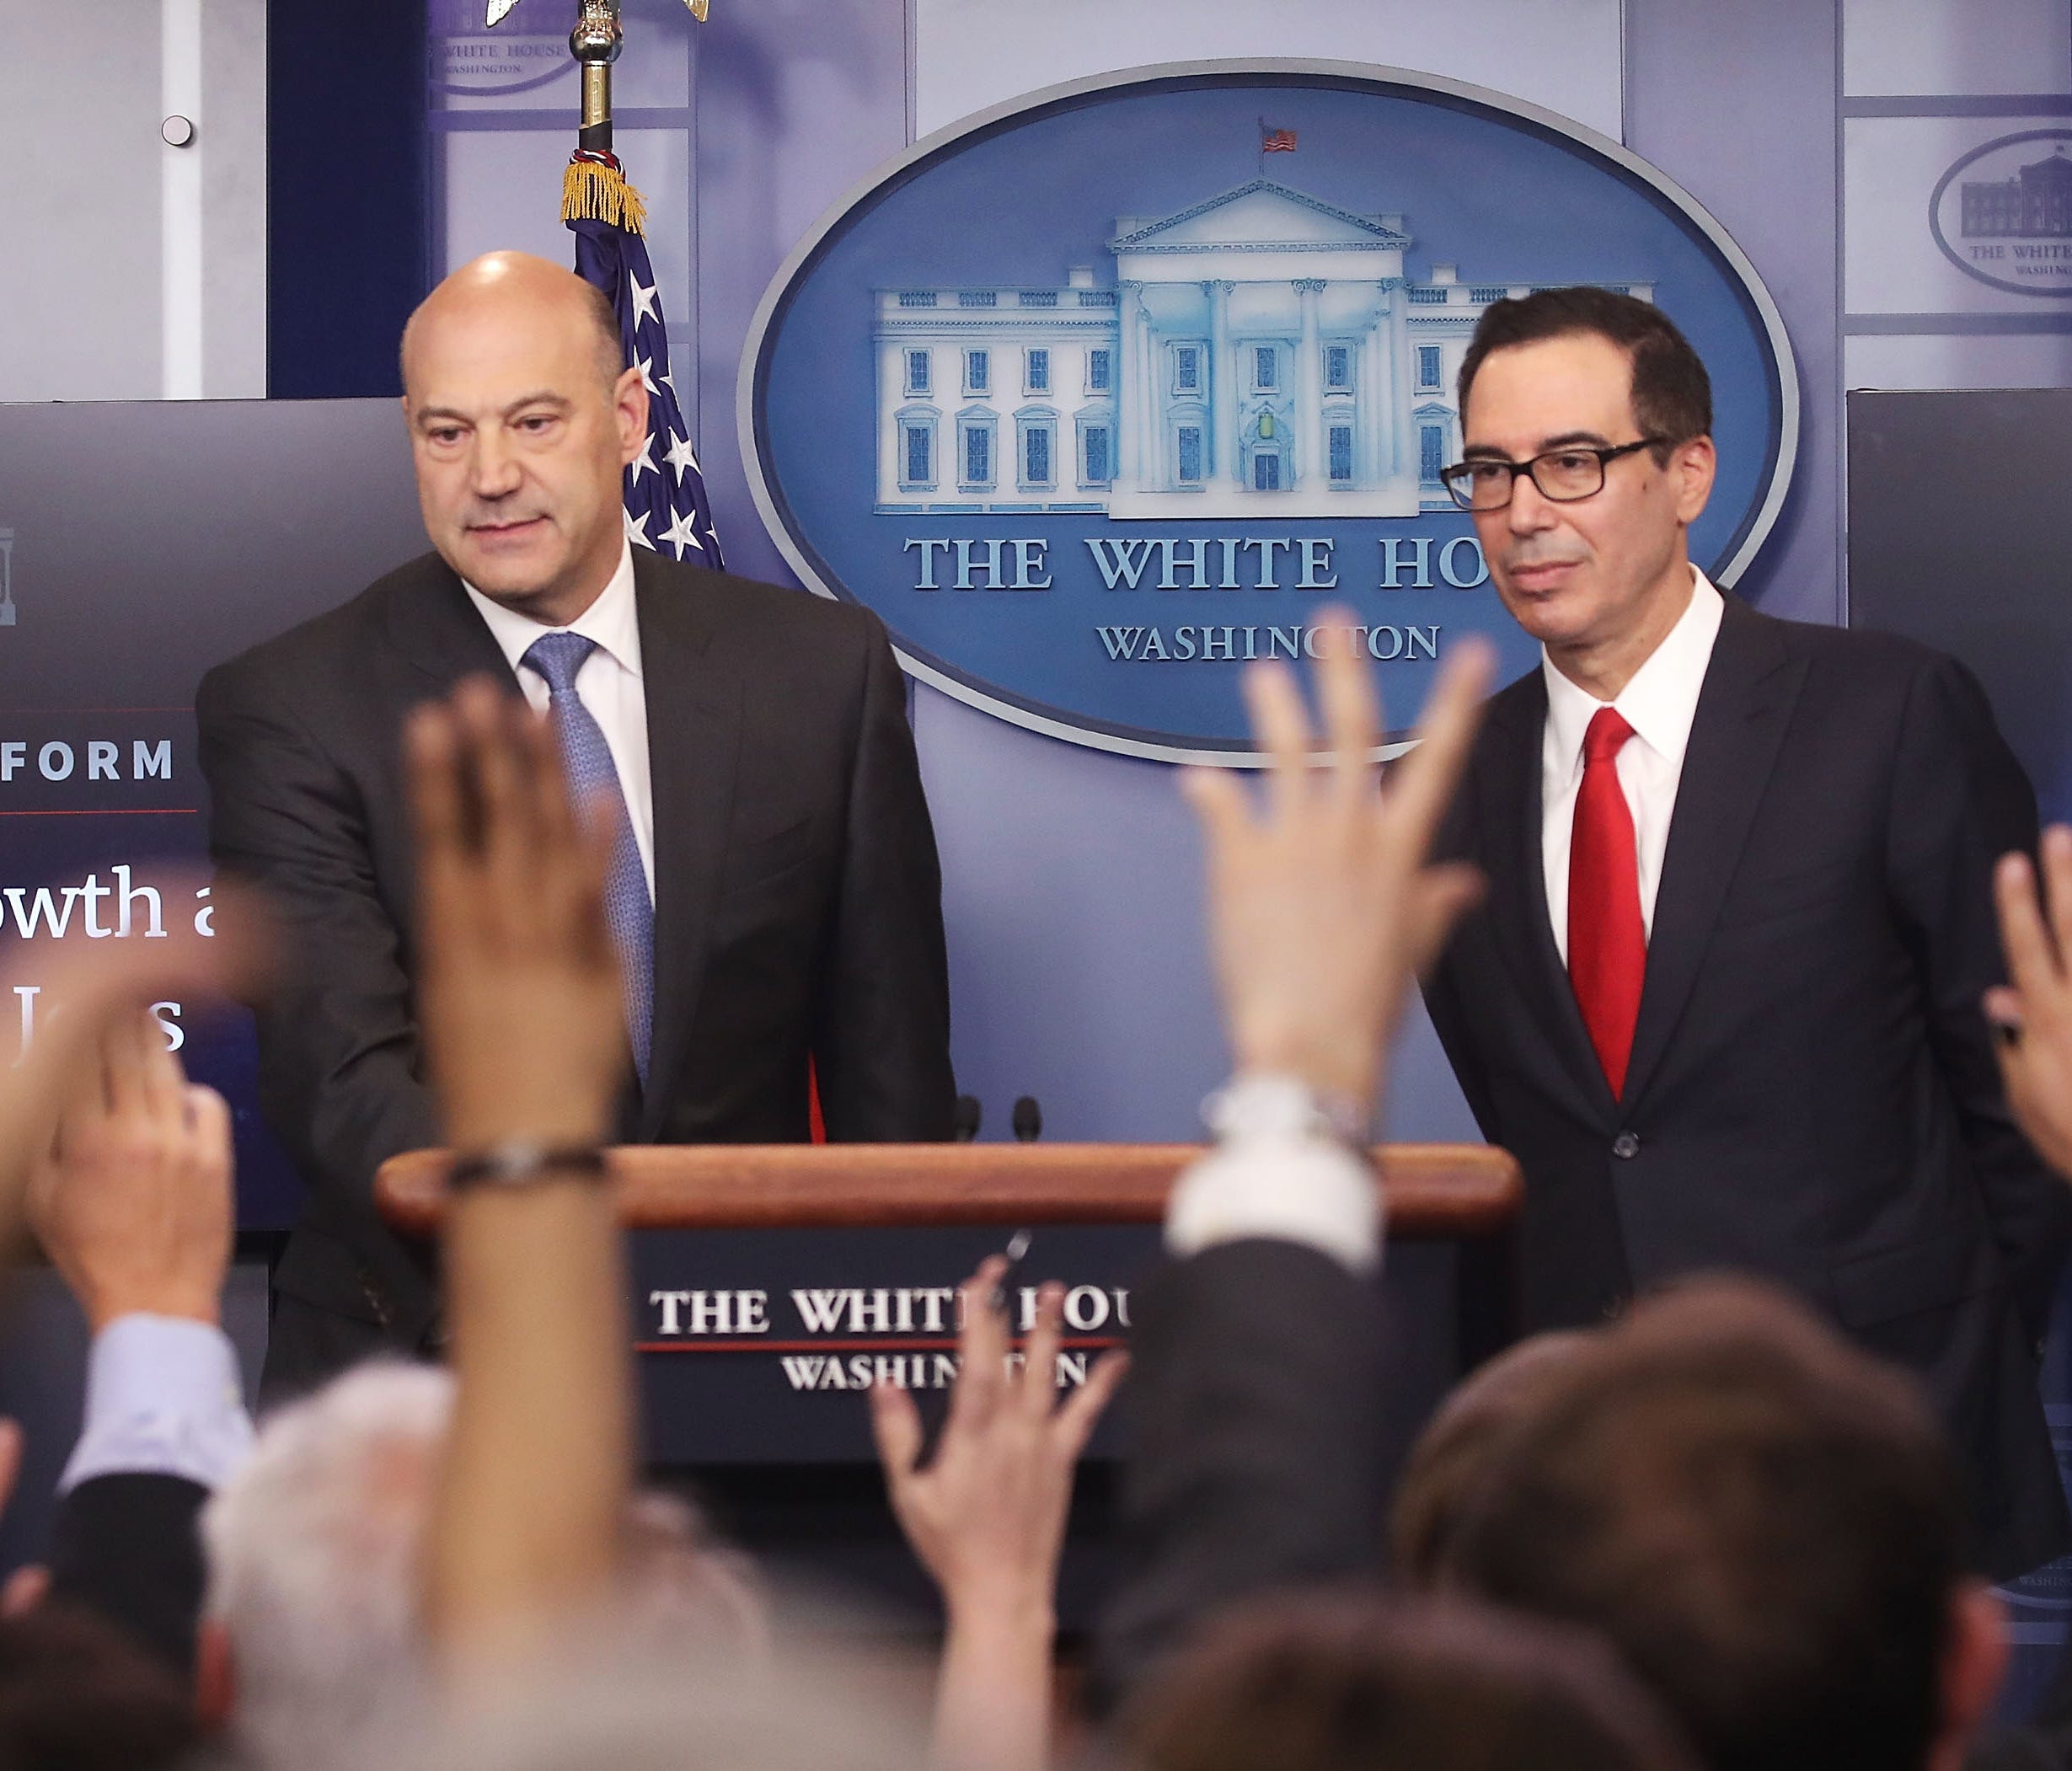 Treasury Secretary Steven Mnuchin and National Economic Council Director Gary Cohn speak about President Trump's new tax reform plan during a briefing at the White House on April 26, 2017.